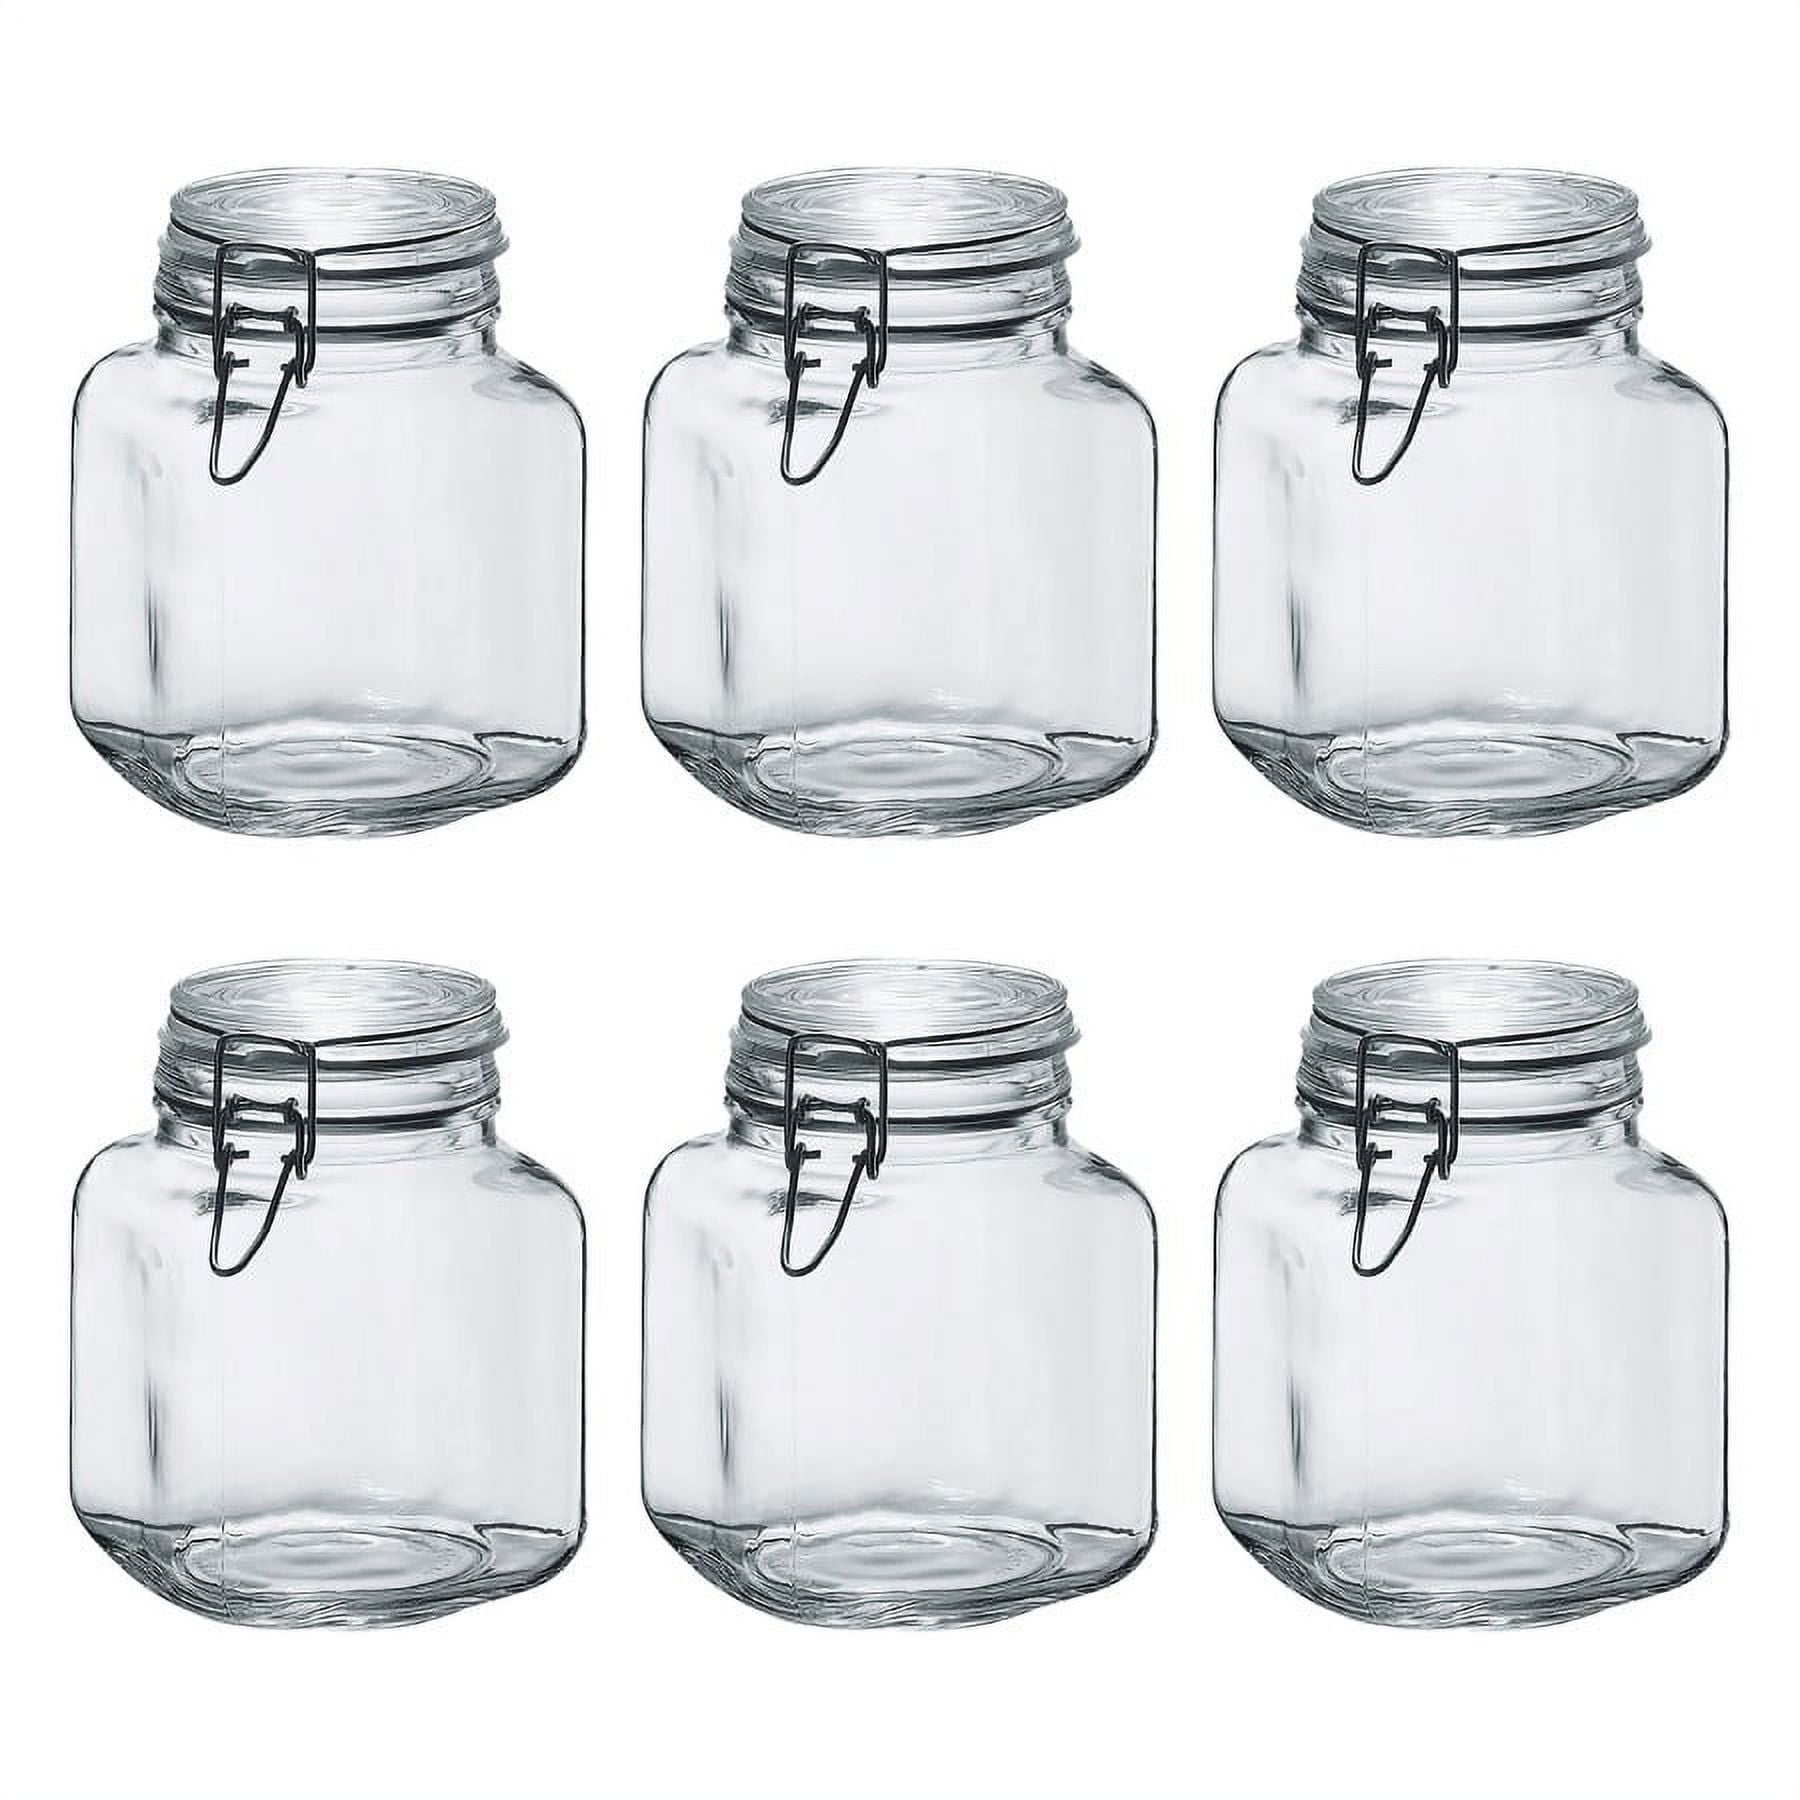 Amici Home Glass Hermetic Preserving Canning Jar Italian, Airtight